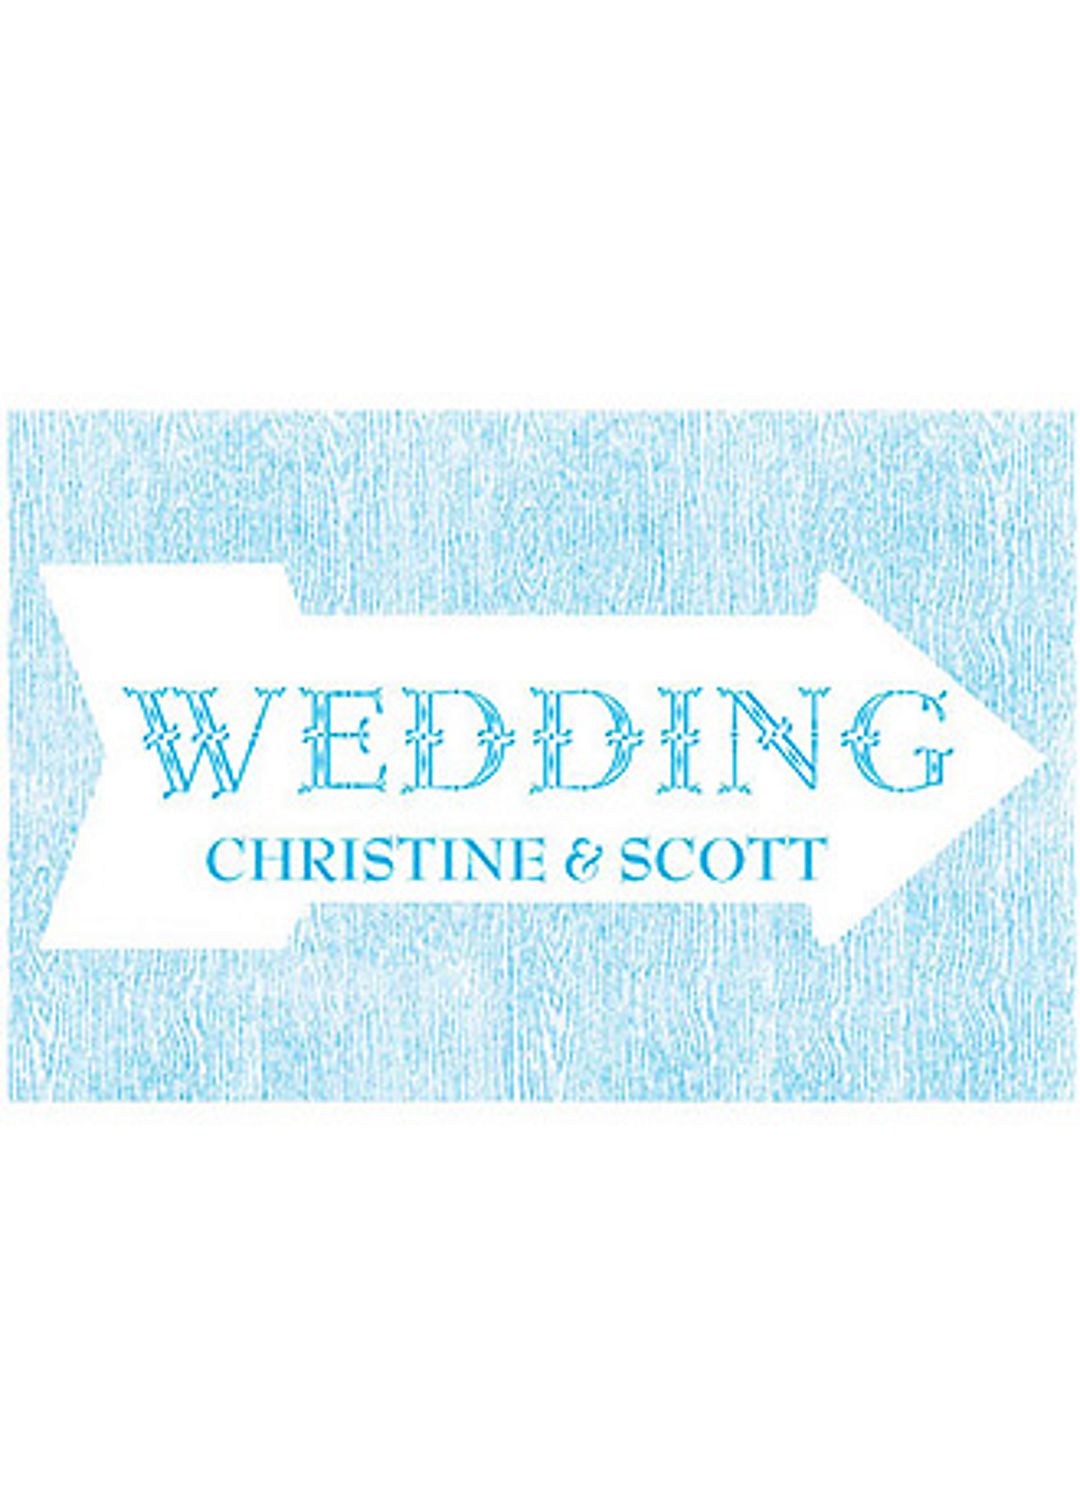 Pointing Arrow Wedding Directional Sign Image 1